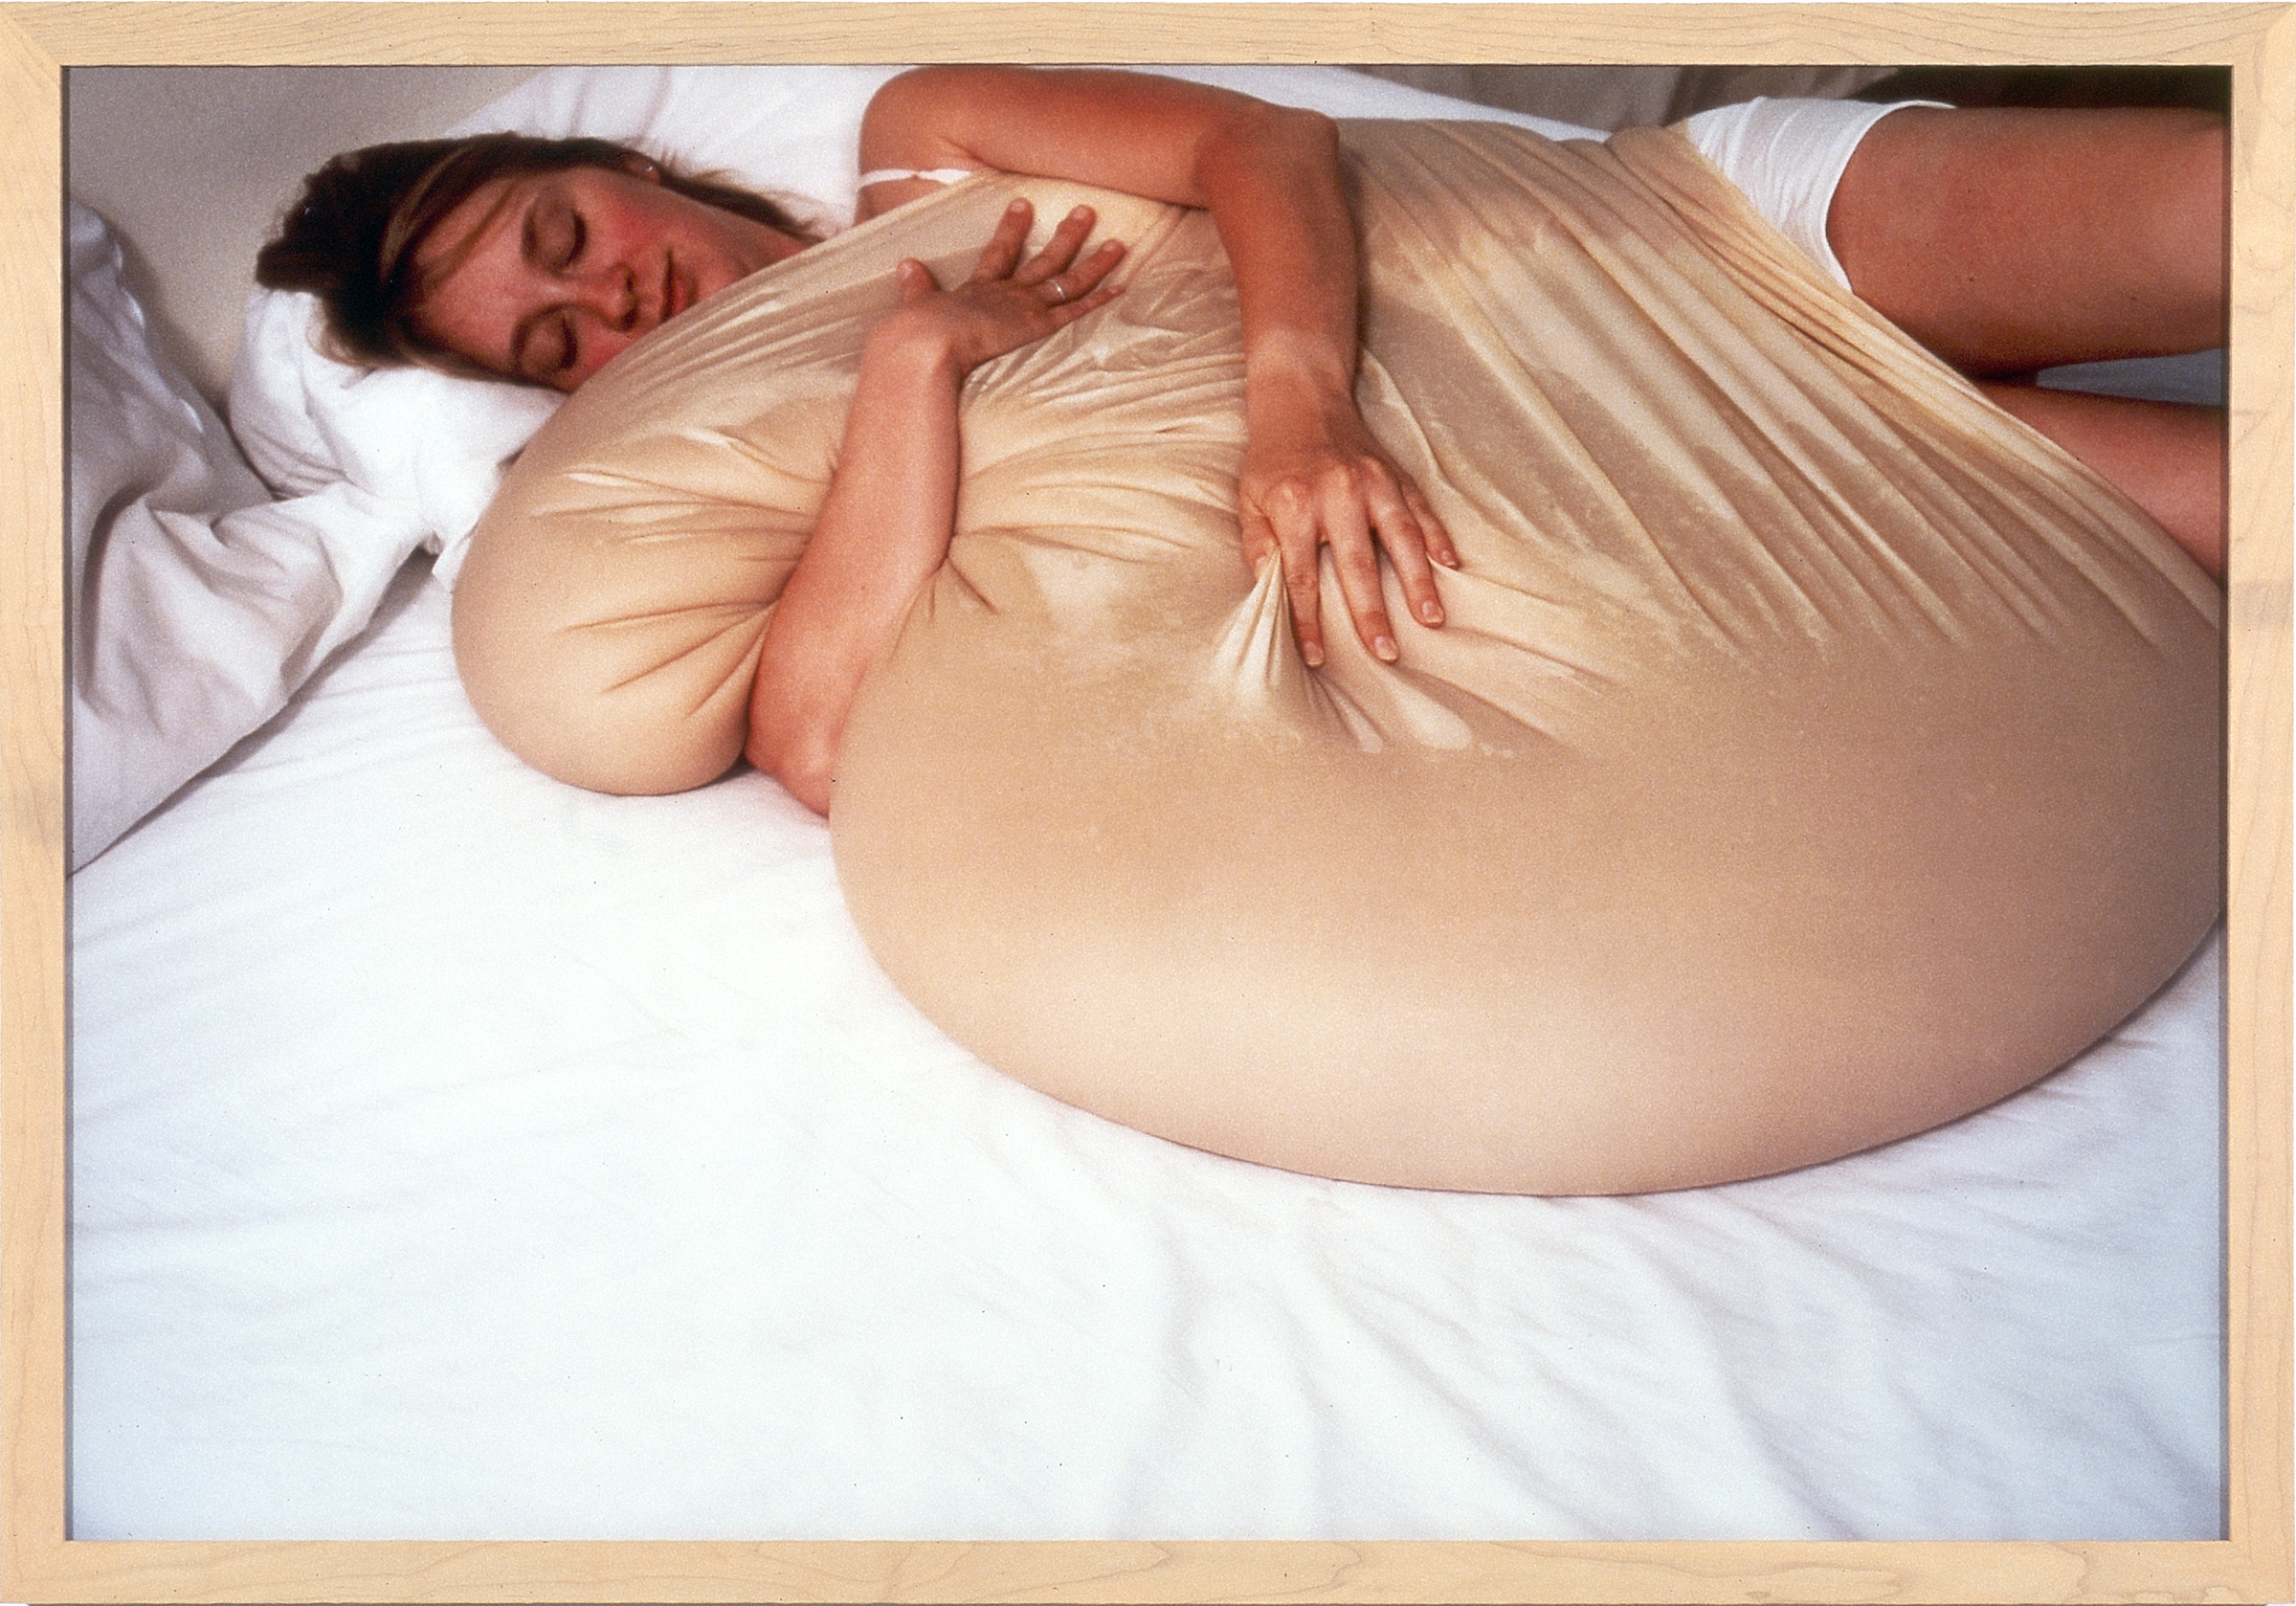 Jeanne Dunning, The Blob 3, 1999